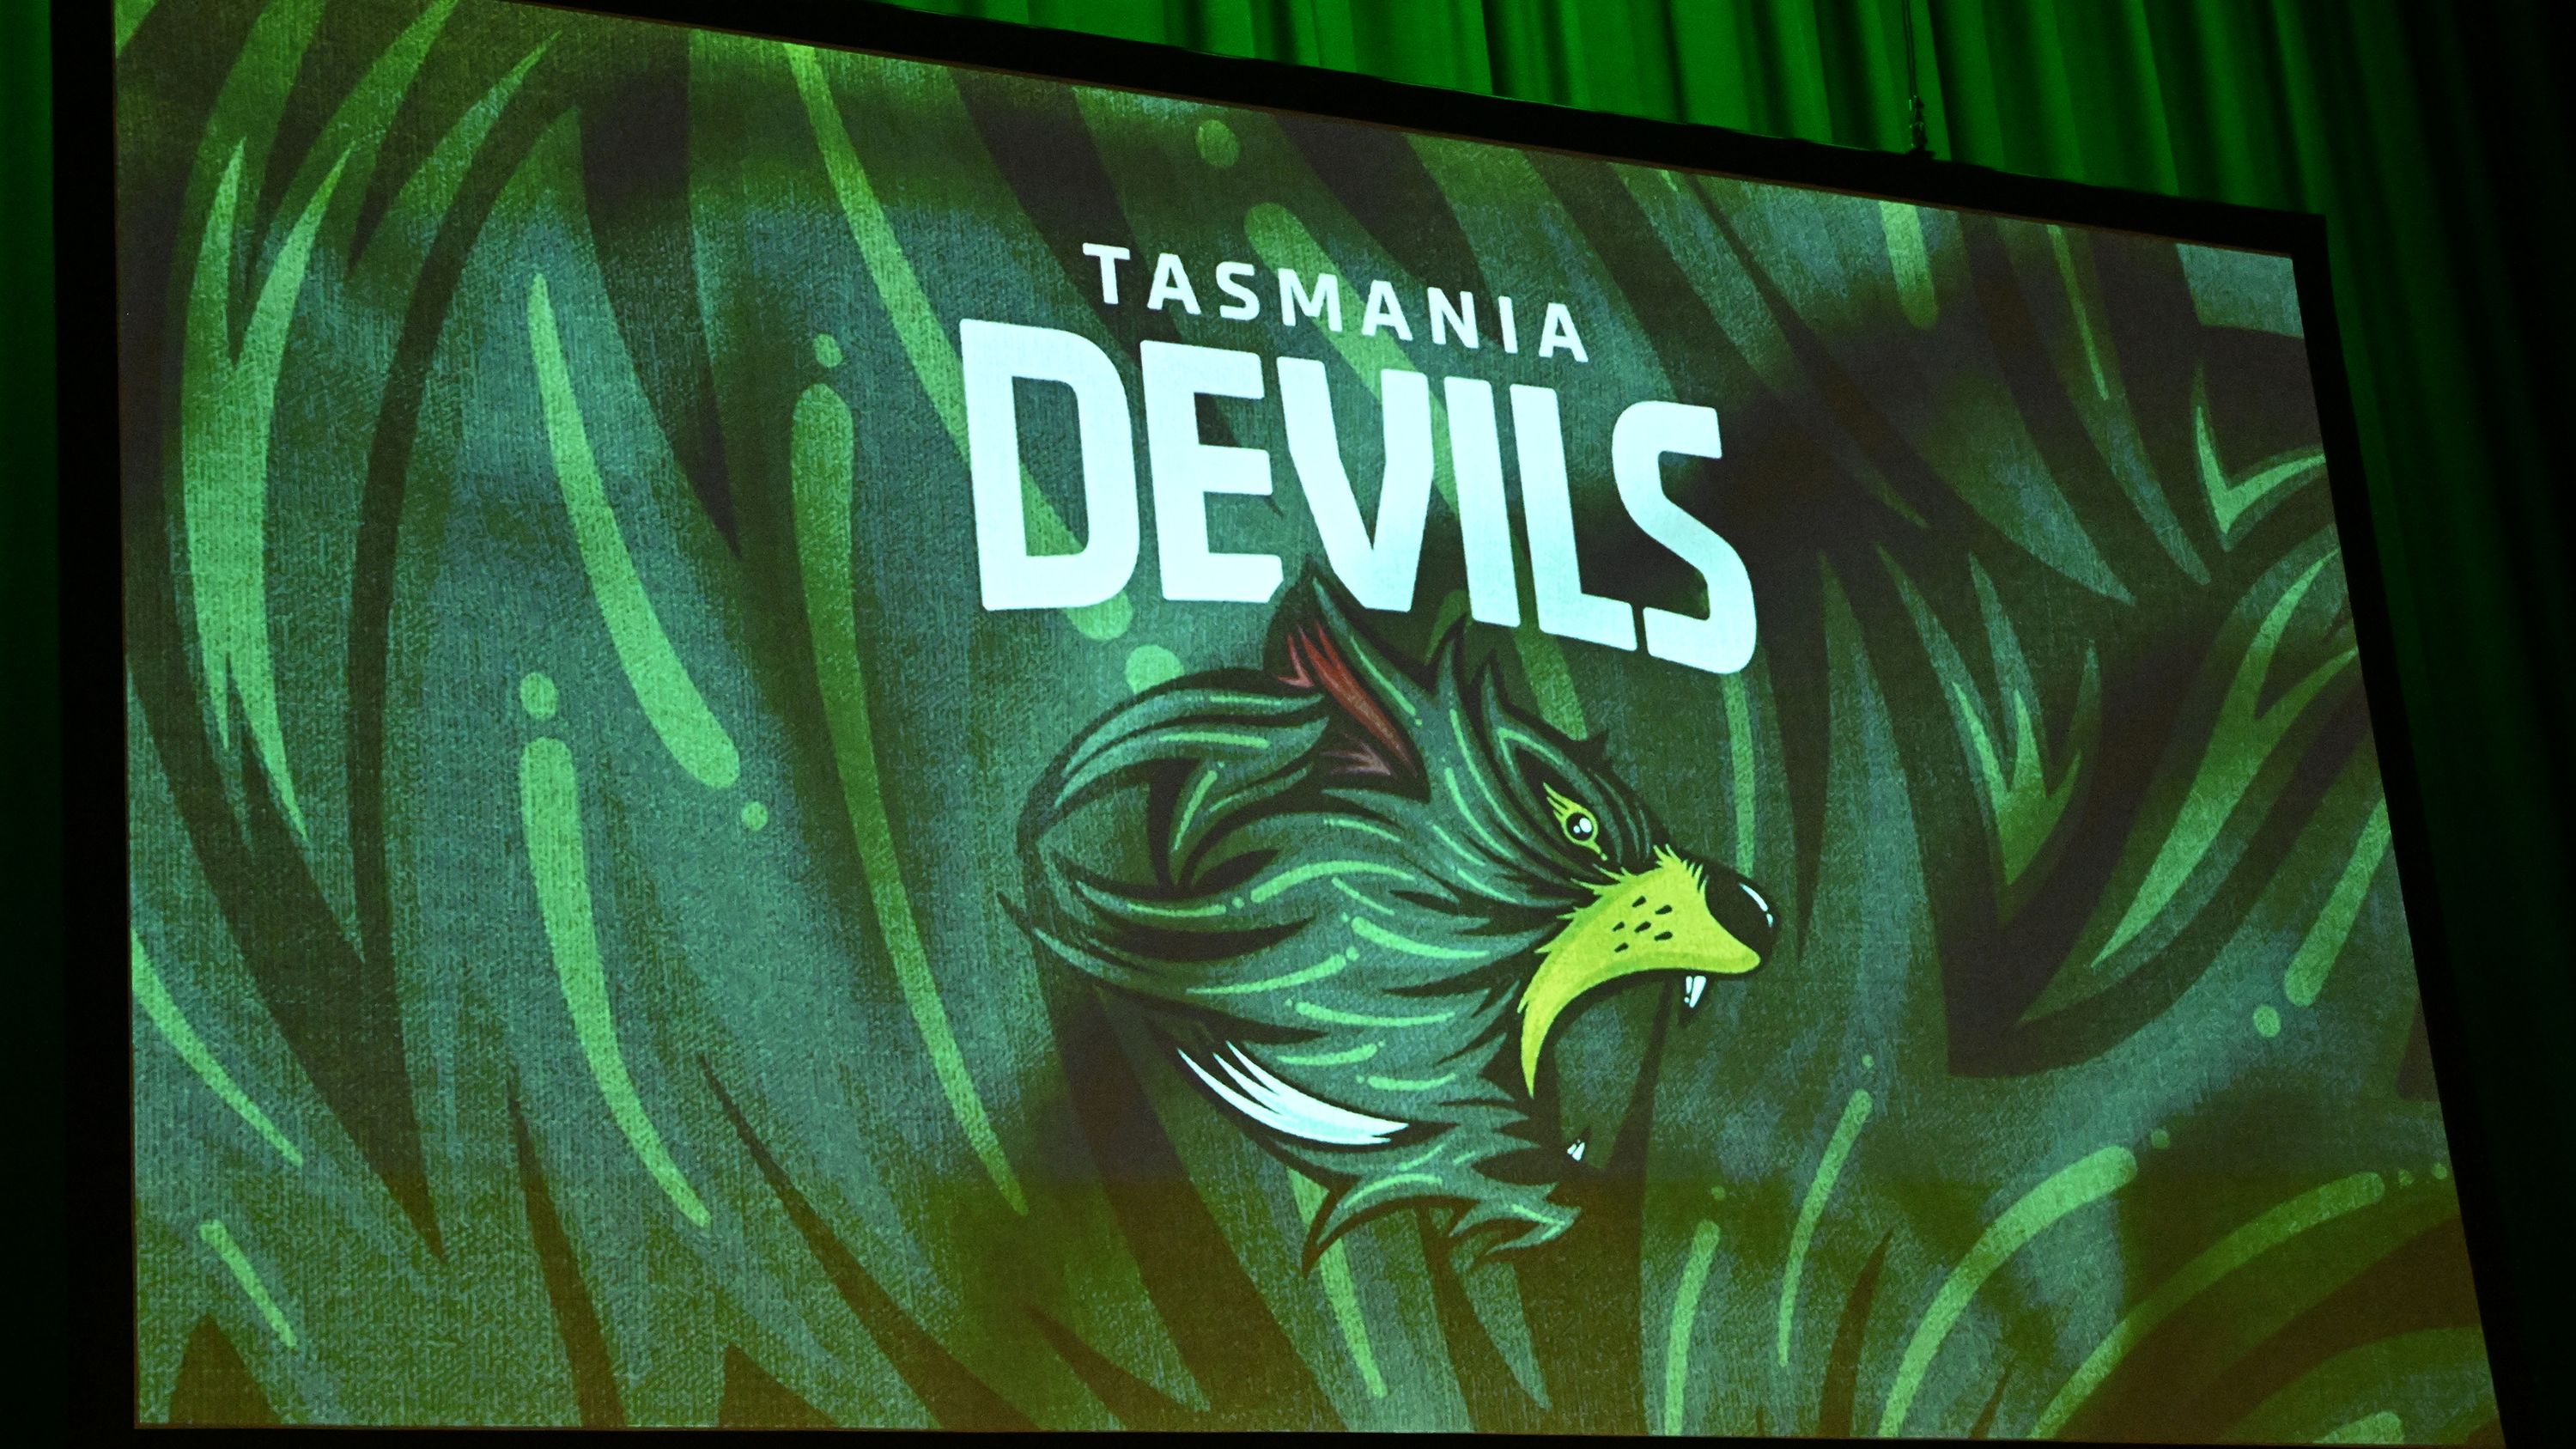 The Tasmania Devils logo is unveiled during an AFL event.